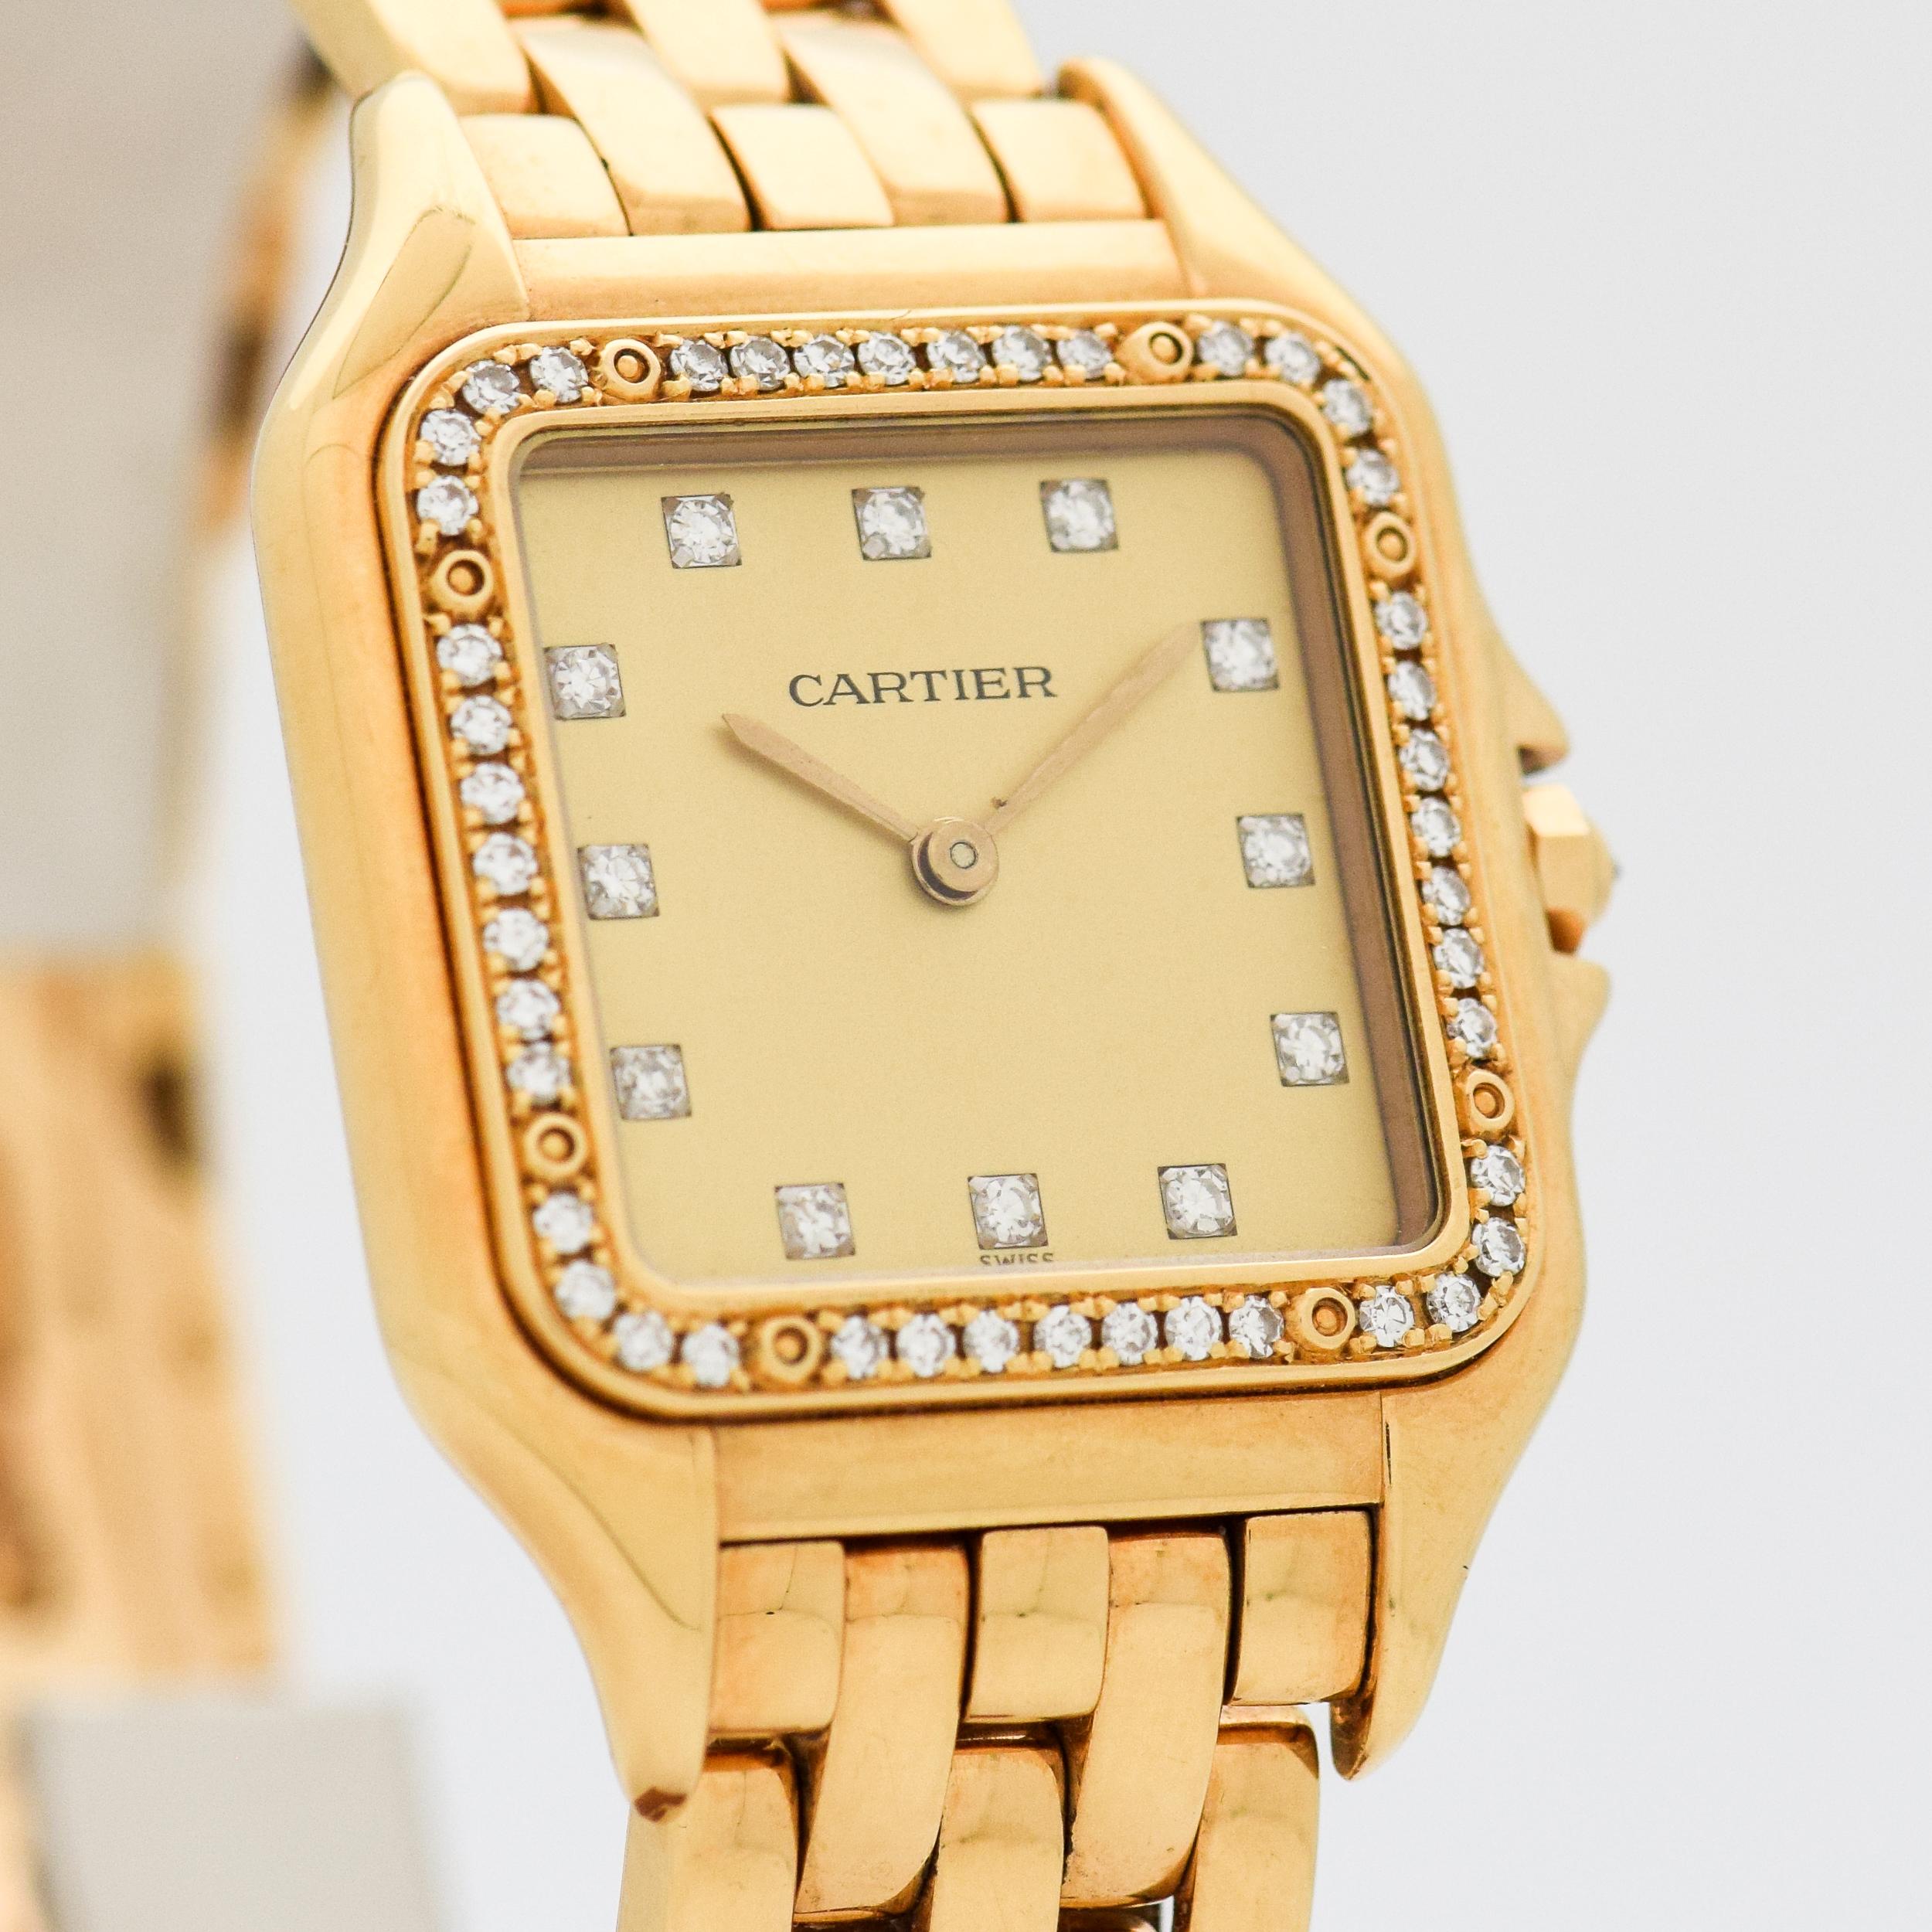 1990's era Cartier Men's Size Panthere 18k Yellow Gold with Diamond Bezel. Original Gold Color Dial with Square Diamond Markers with Original Cartier 18k Yellow Gold Bracelet. Comes with Original Box. Size: 29mm x 39mm lug to lug (1.14 in. x 1.54